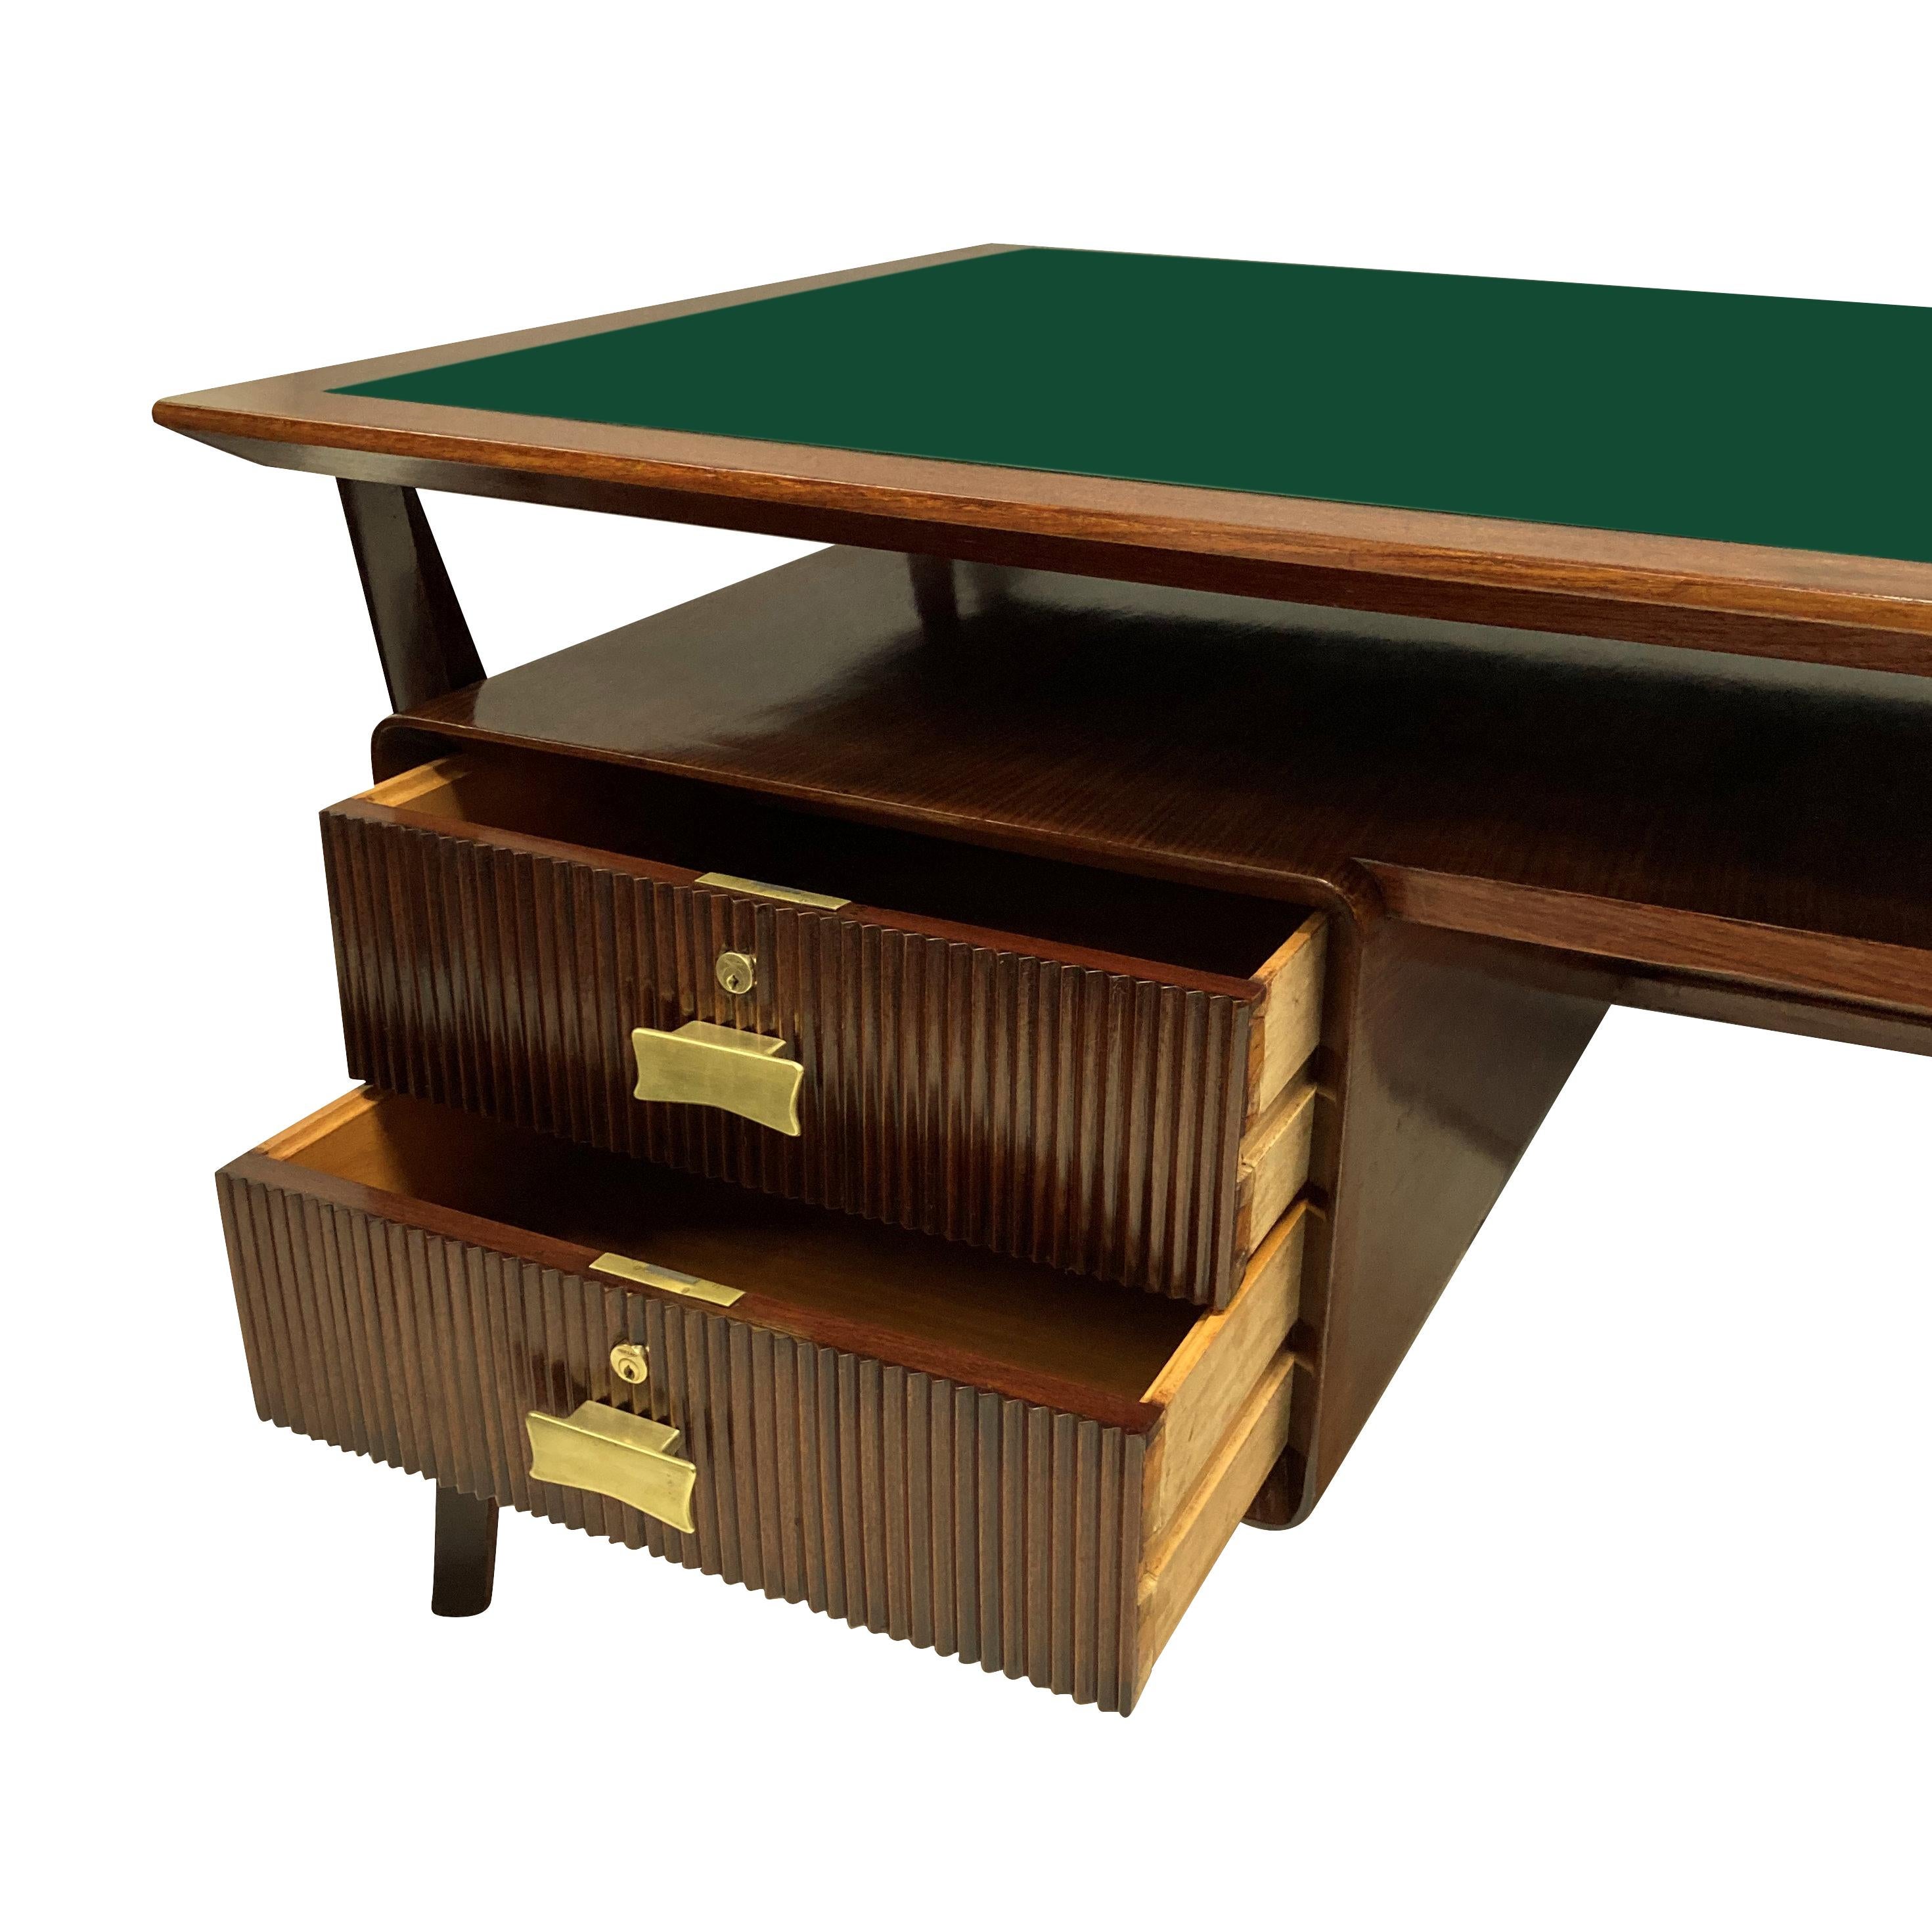 A large Italian walnut partners desk by Osvaldo Borsani, with four tambour fronted drawers with brass fittings and the original green glass top. The opening is 59cm high x 64cm wide.